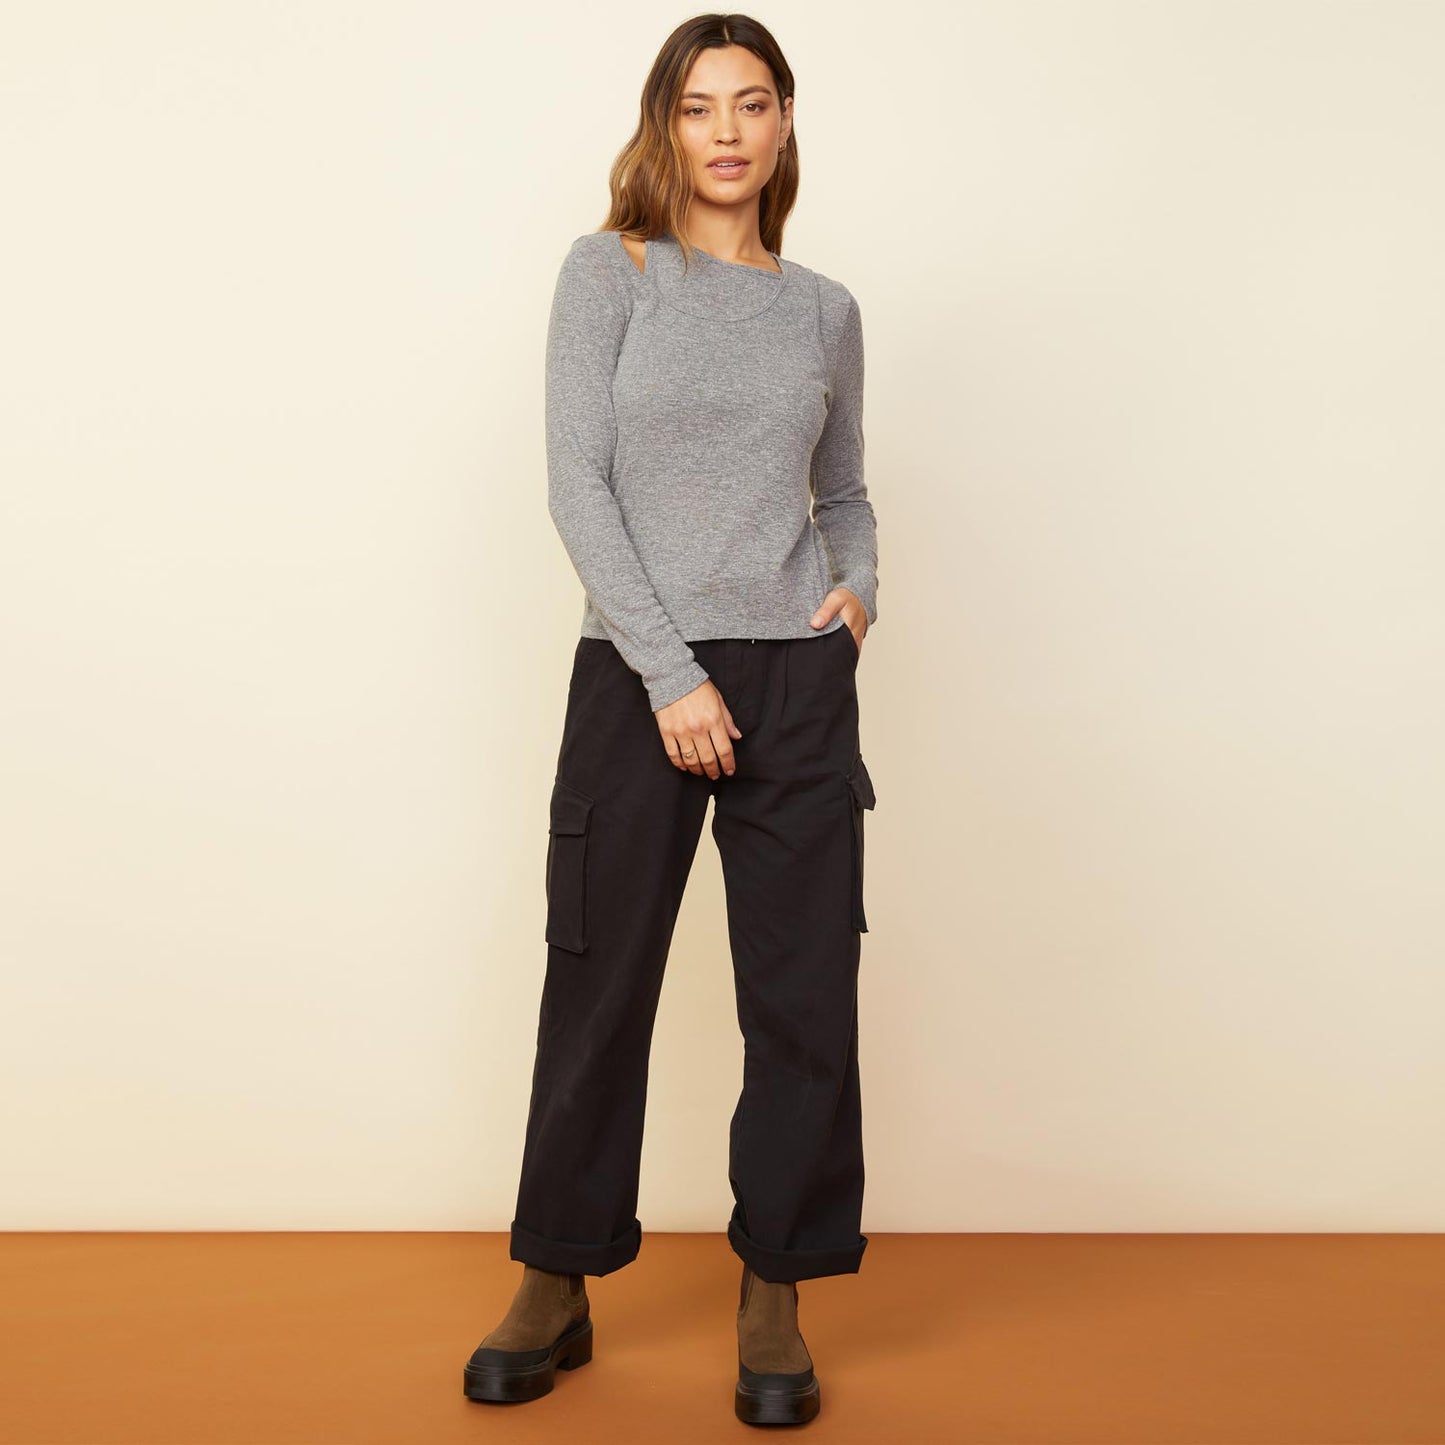 Front view of model wearing the asymmetric long sleeve top in granite.